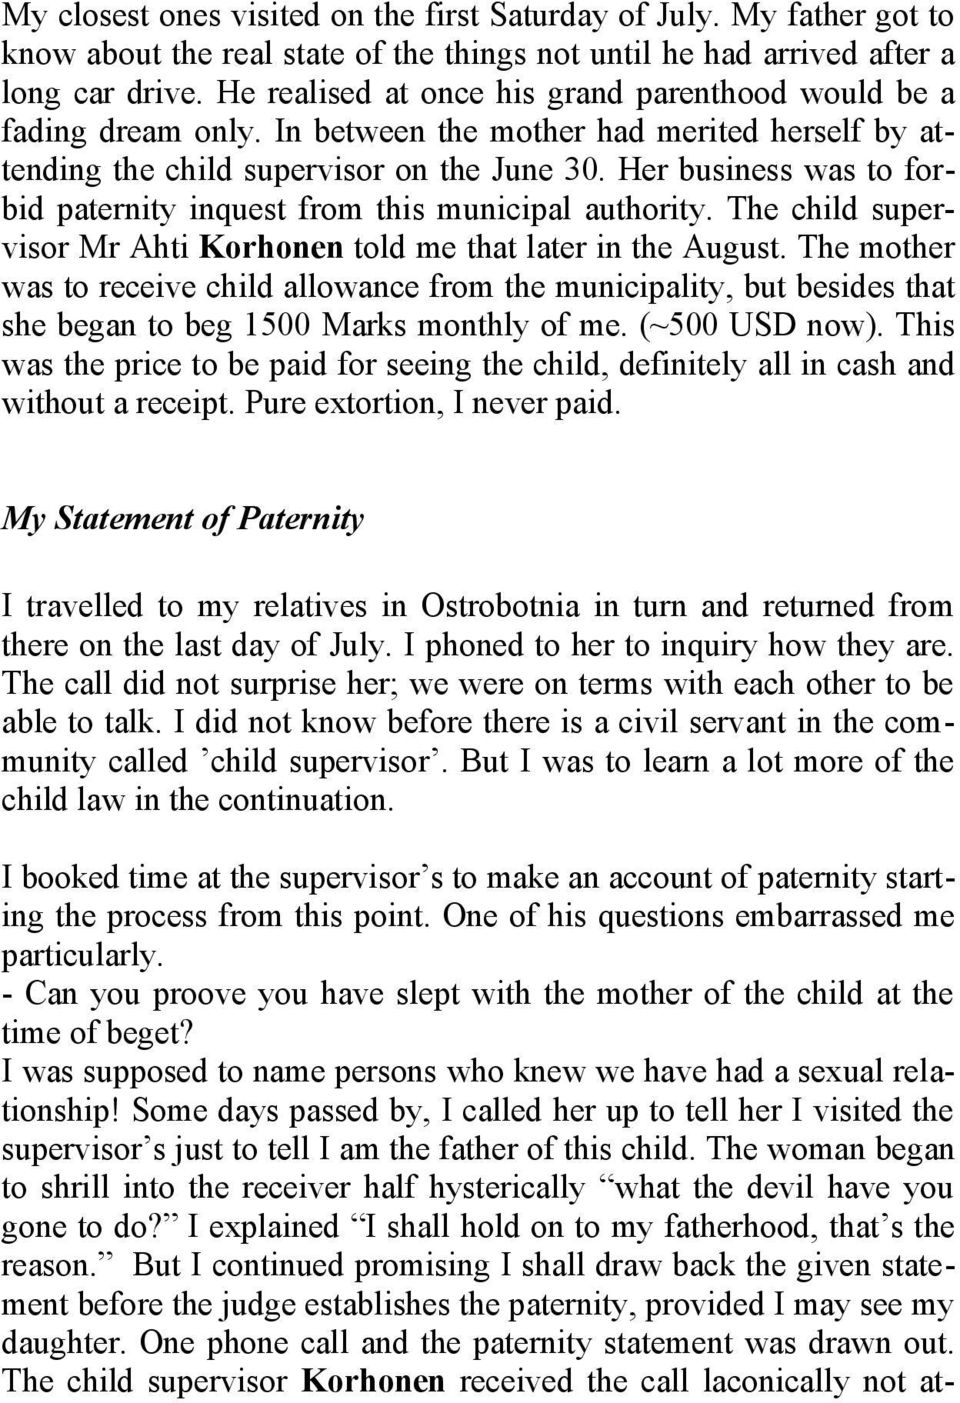 Her business was to forbid paternity inquest from this municipal authority. The child supervisor Mr Ahti Korhonen told me that later in the August.